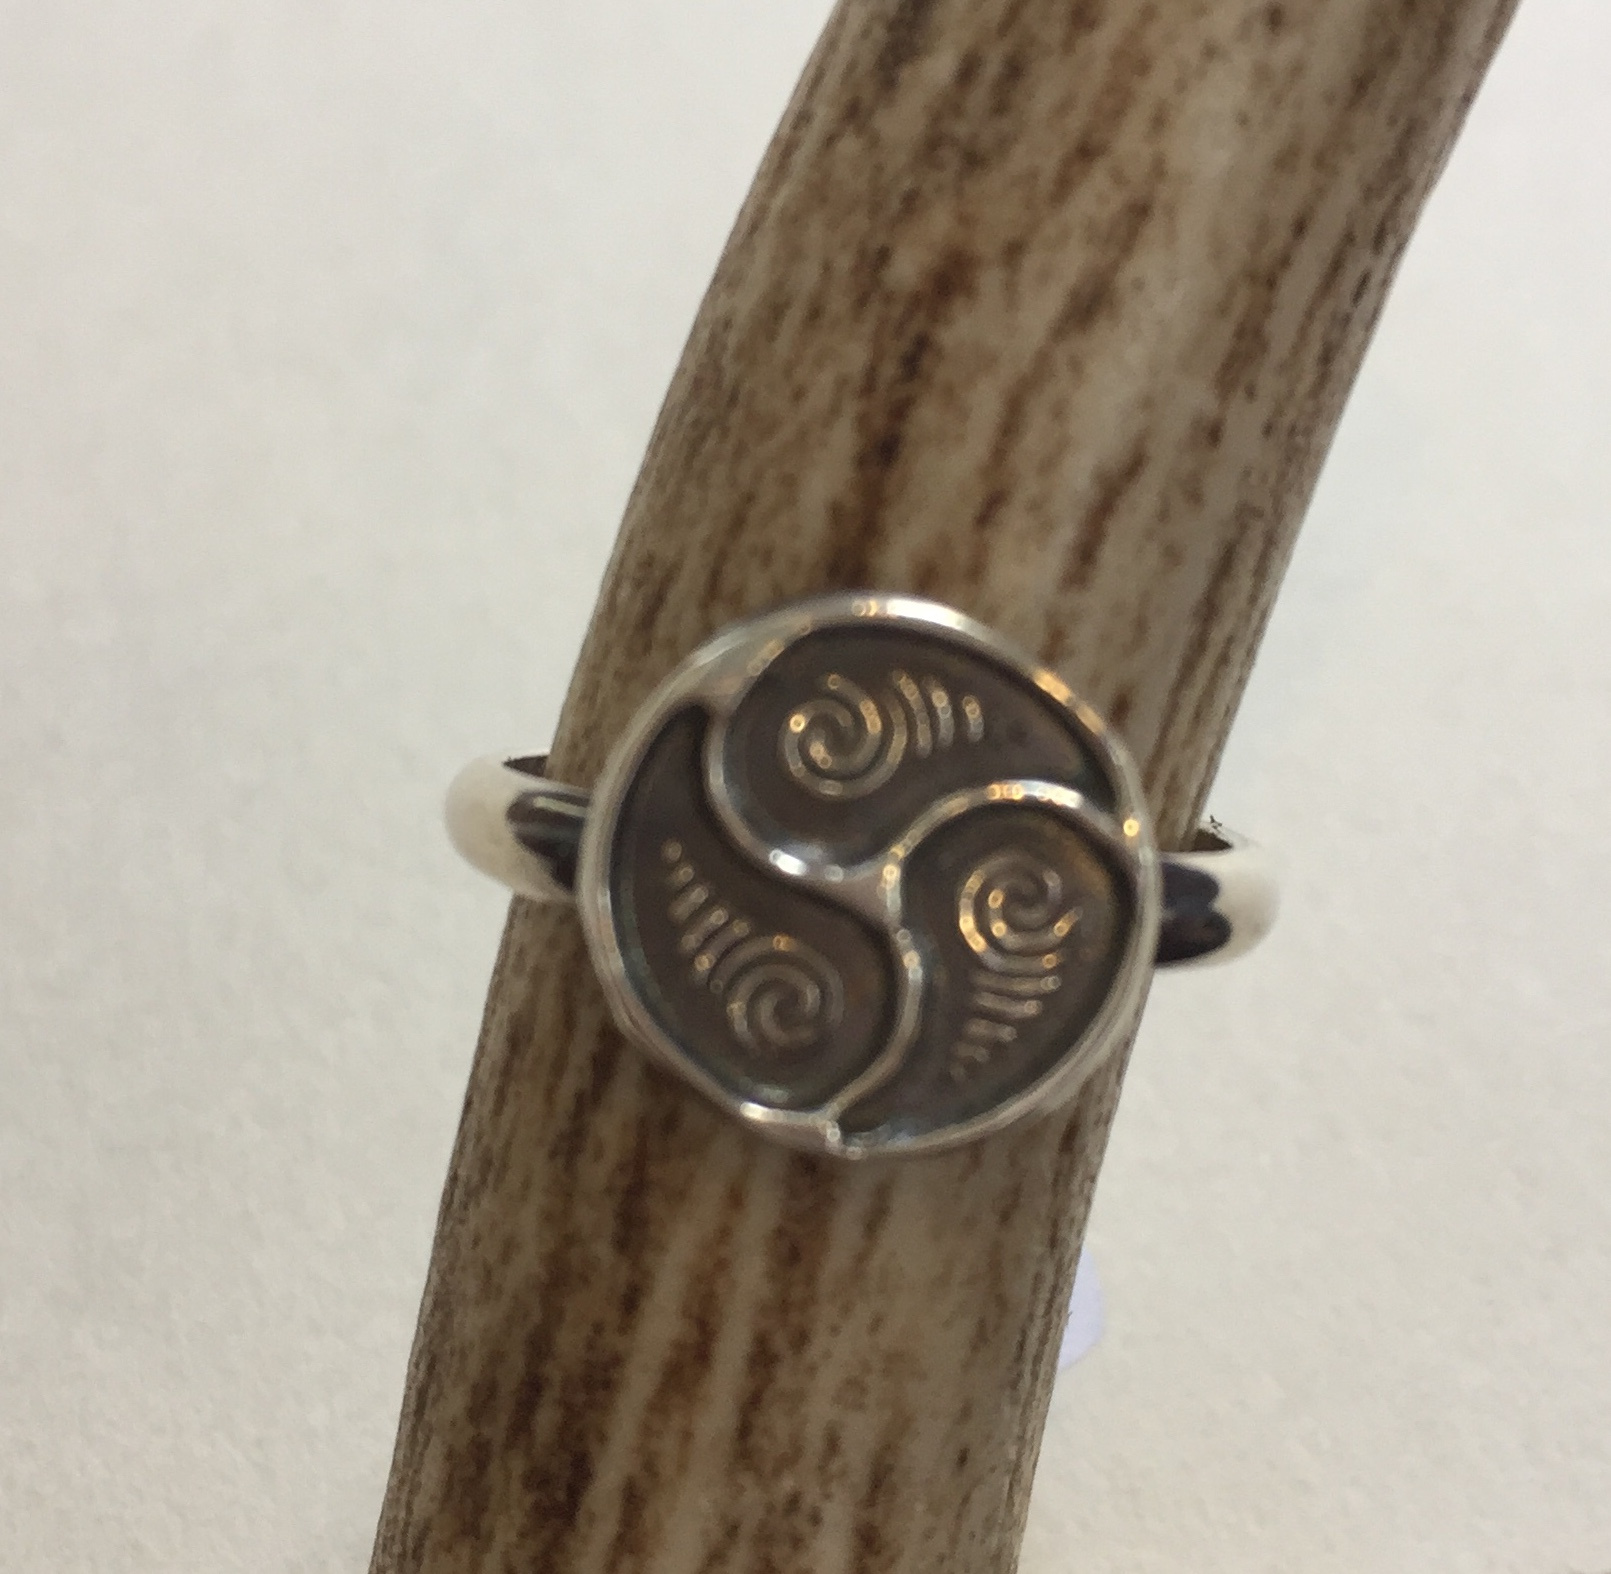 Round Celtic PMC Ring Ma 41
Sterling Silver
$30